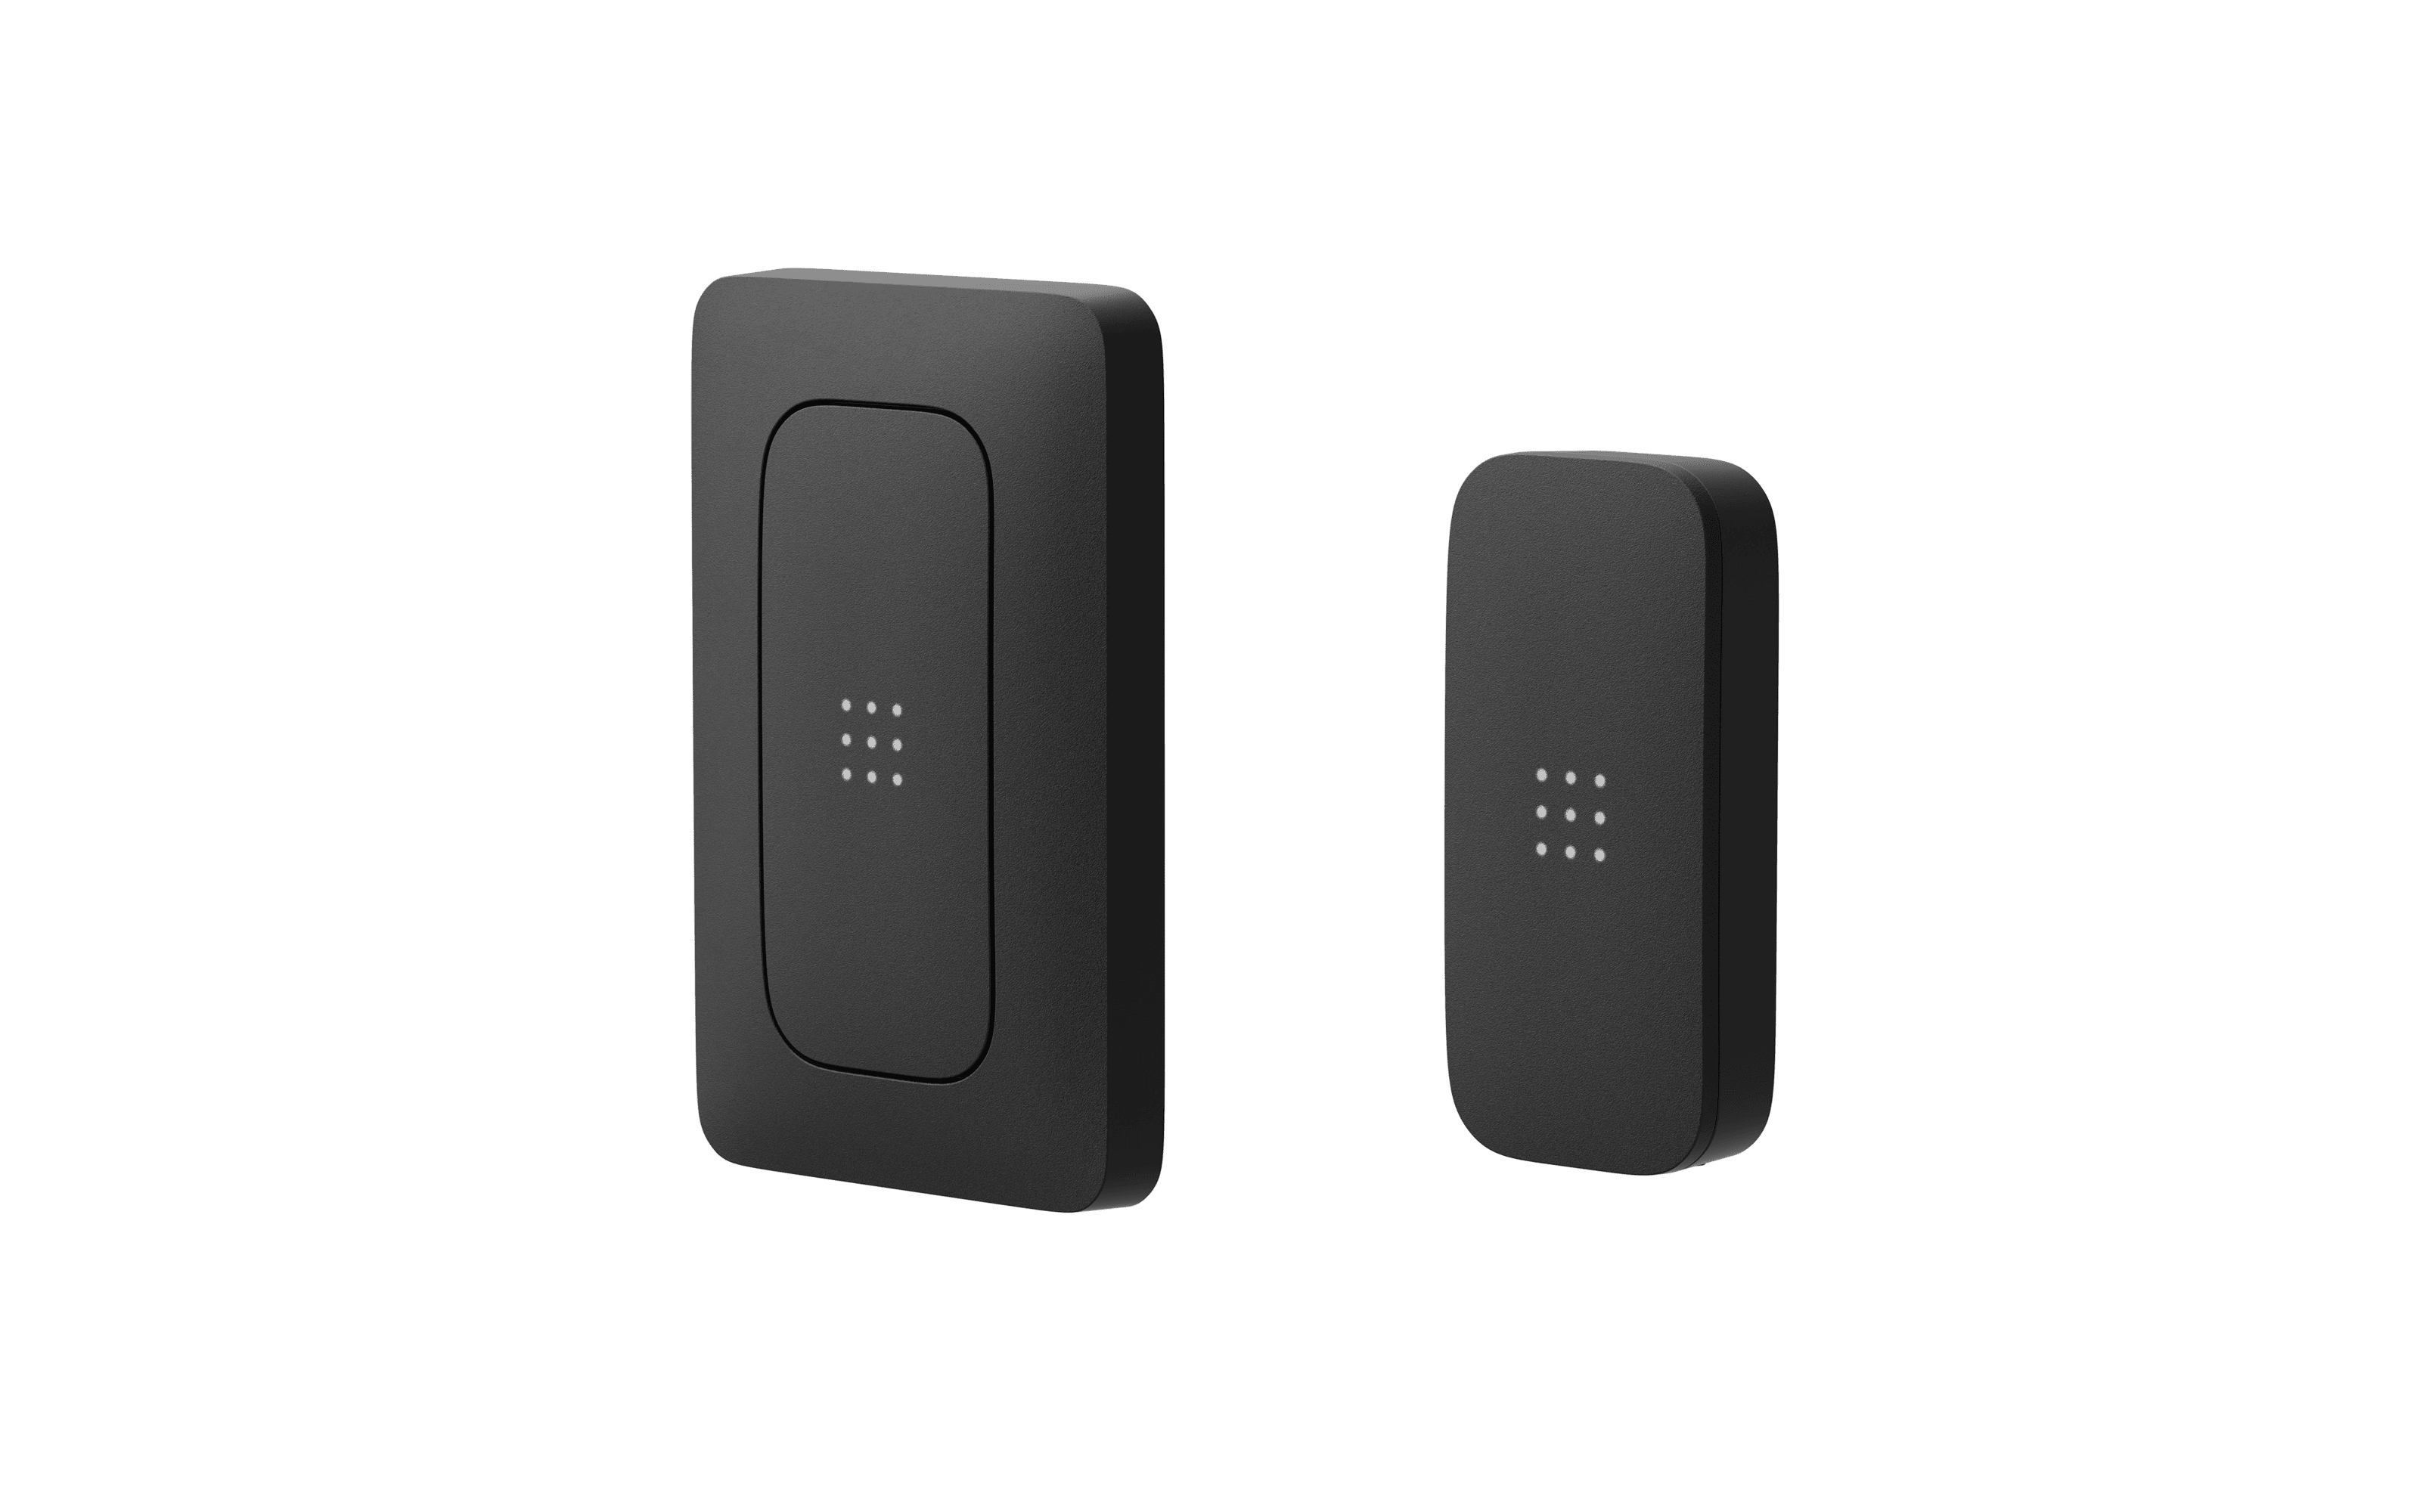 Cloud-based access control card reader - 2 different formats